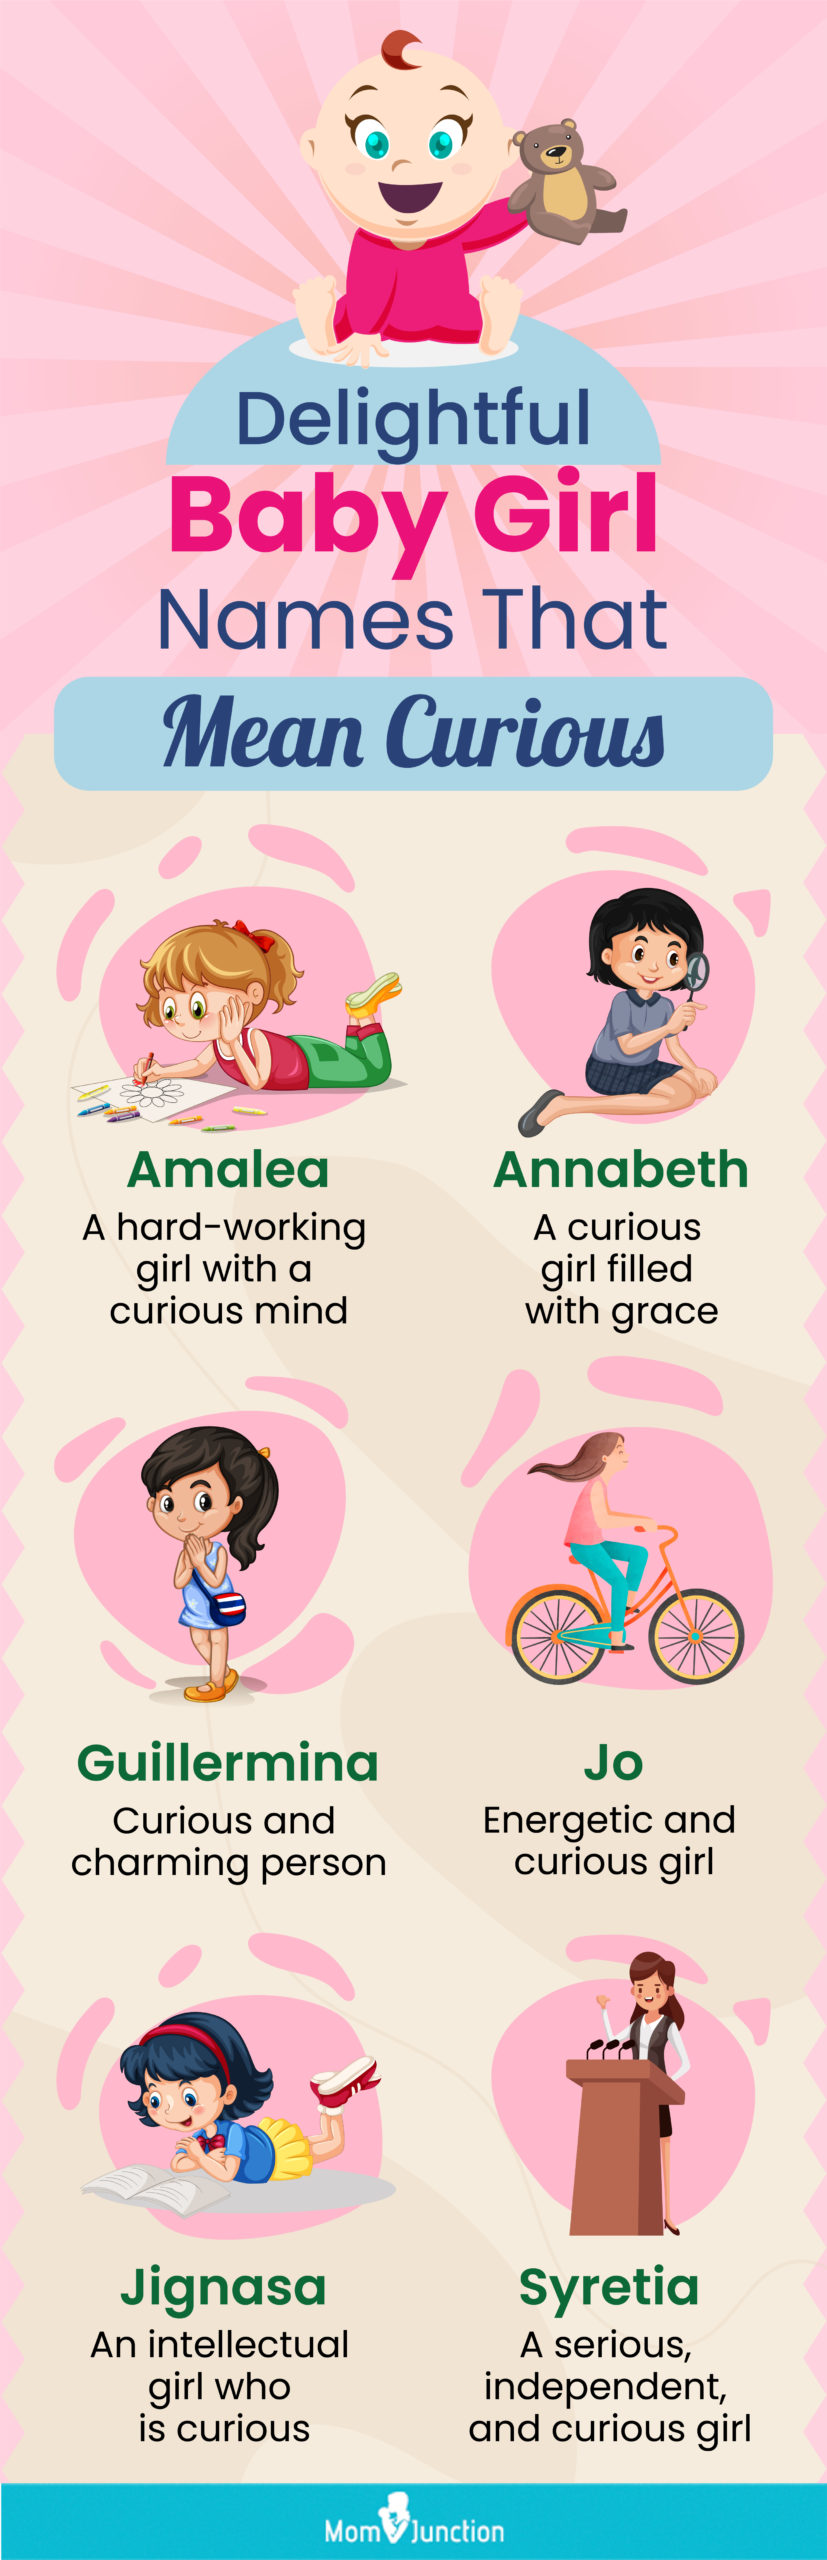 delightful baby girl names that mean curious (infographic)